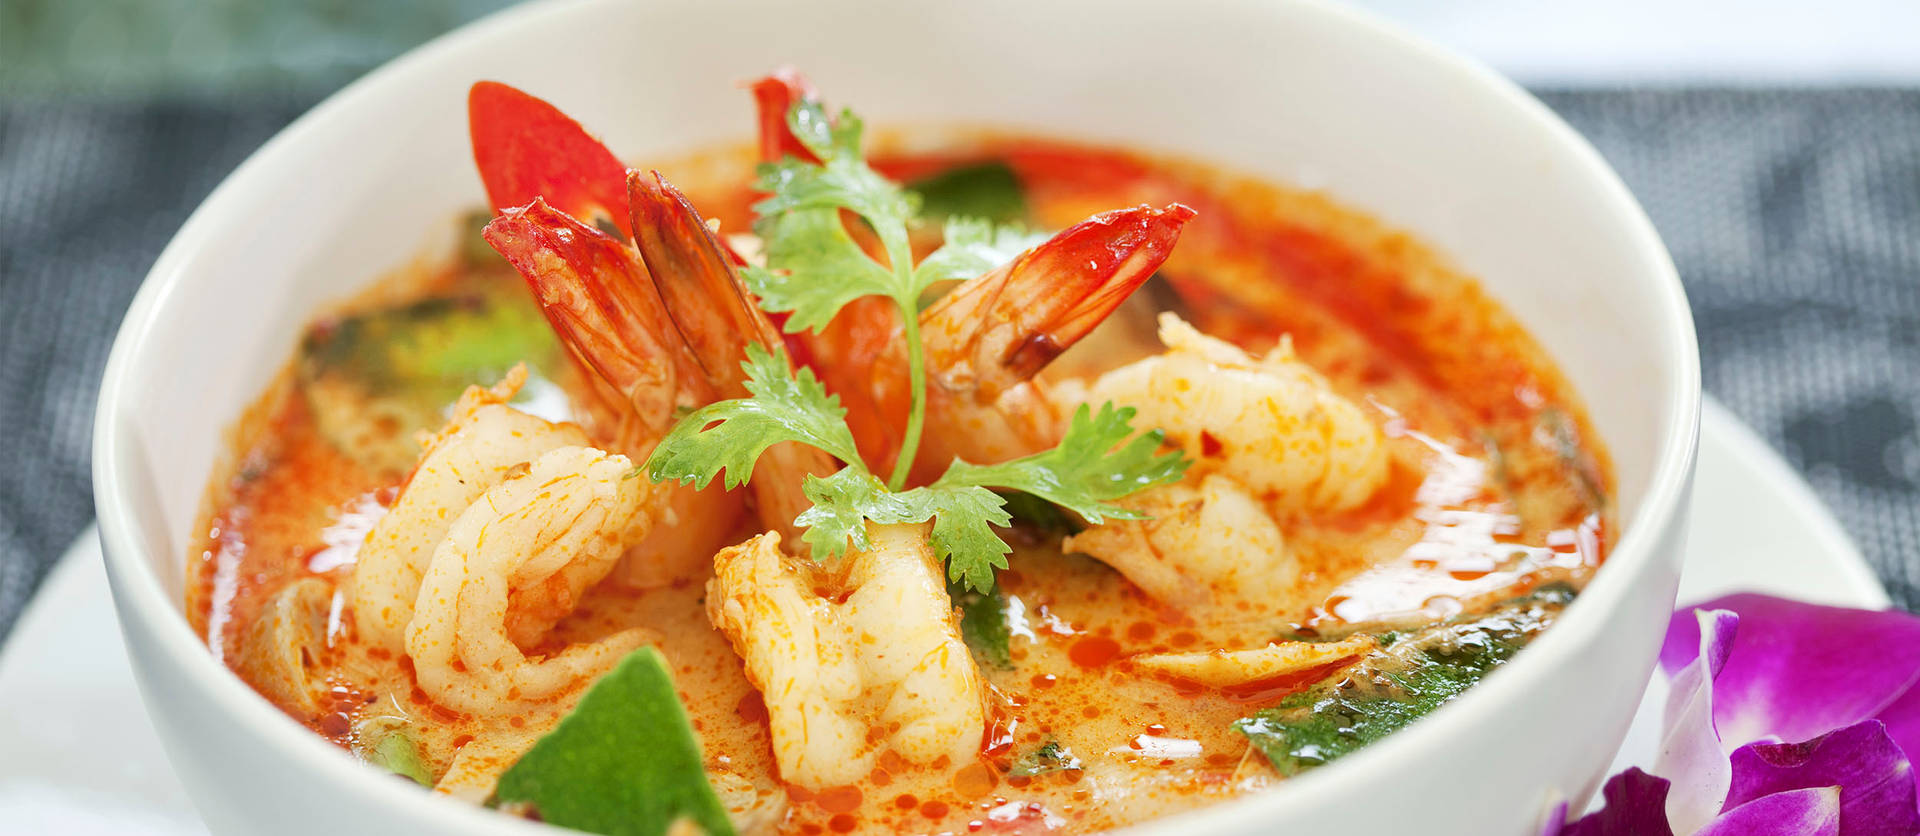 Tom Yum Soup With Seafoods Wallpaper